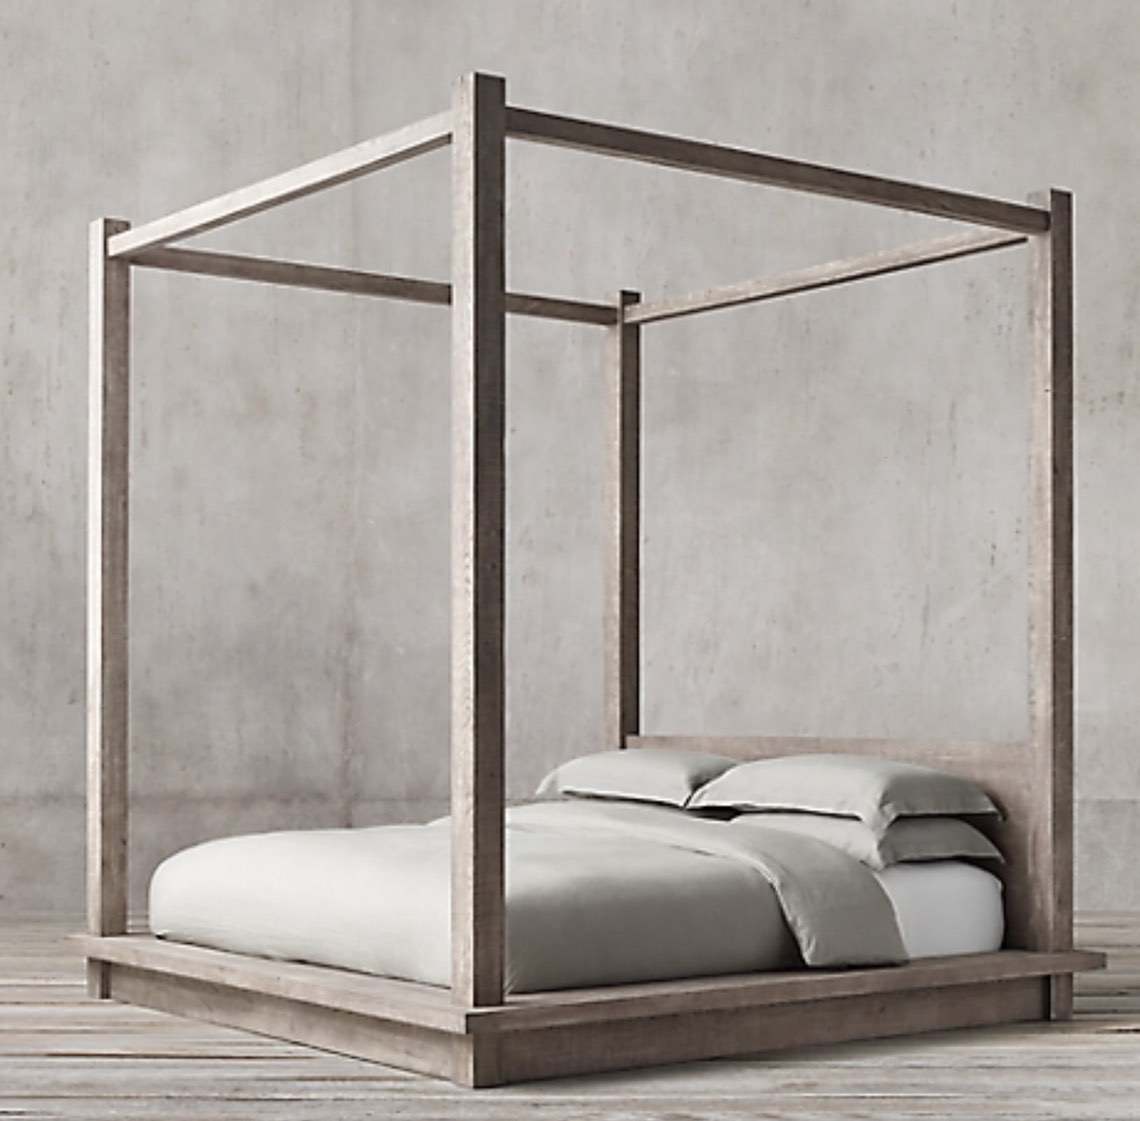 Made to Order Bedroom Furniture. - Four Poster 015-01